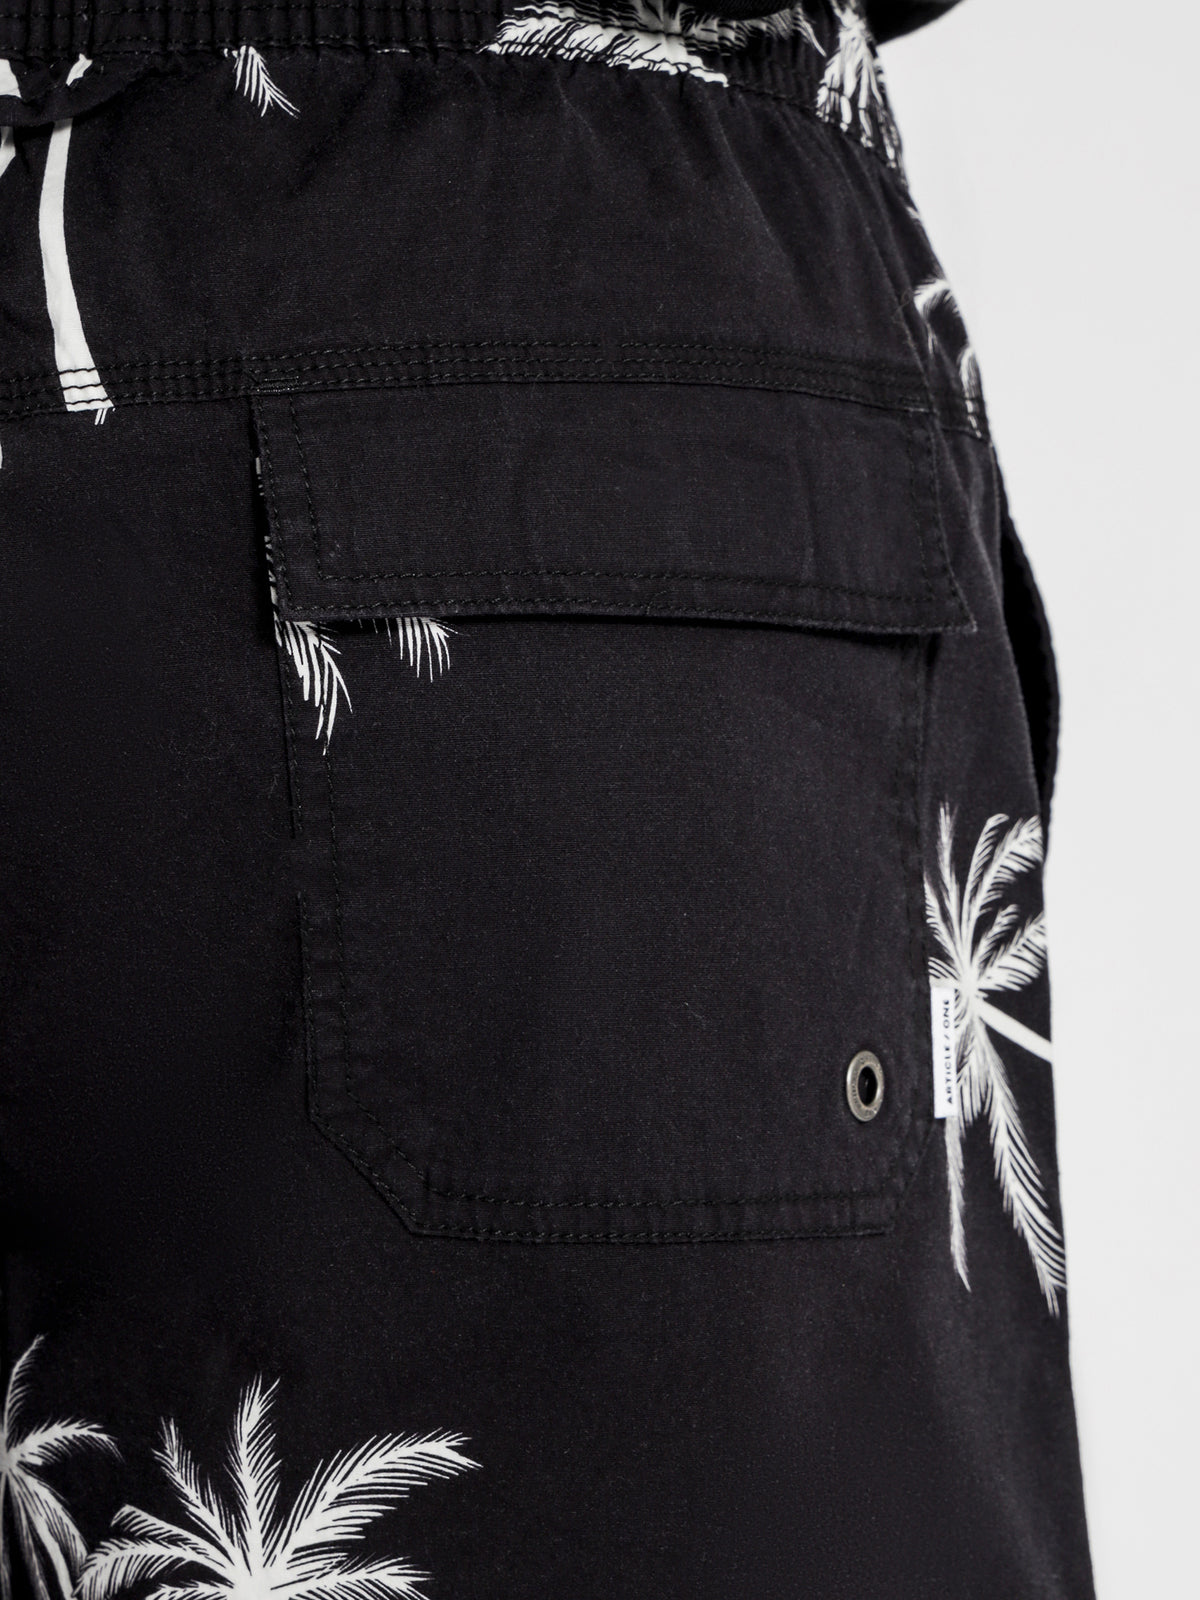 Vacation Mode Shorts in Black